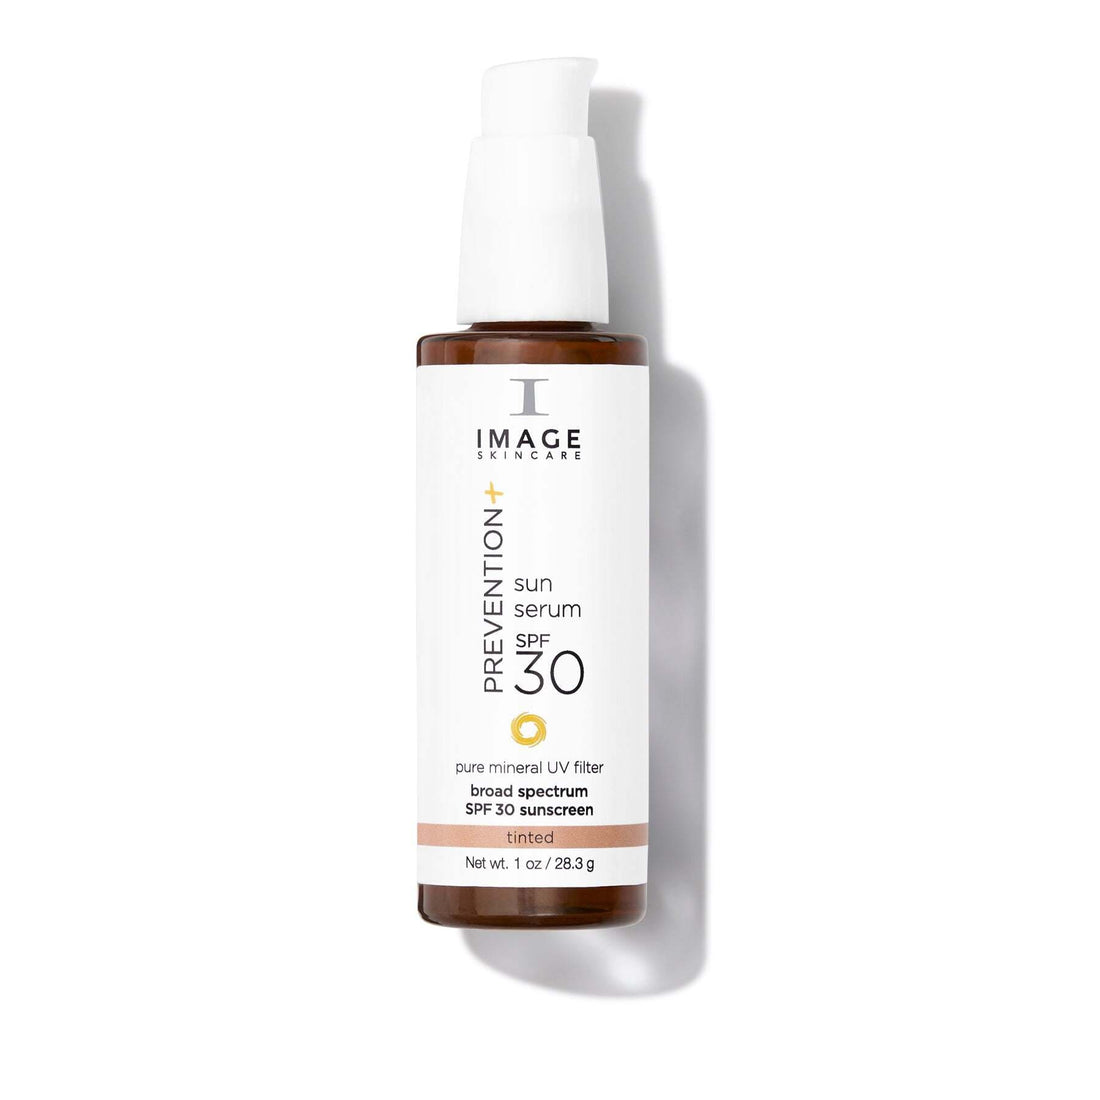 Image Skincare Prevention+ Tinted Sun Serum SPF30 Shop At Skin Type Solutions